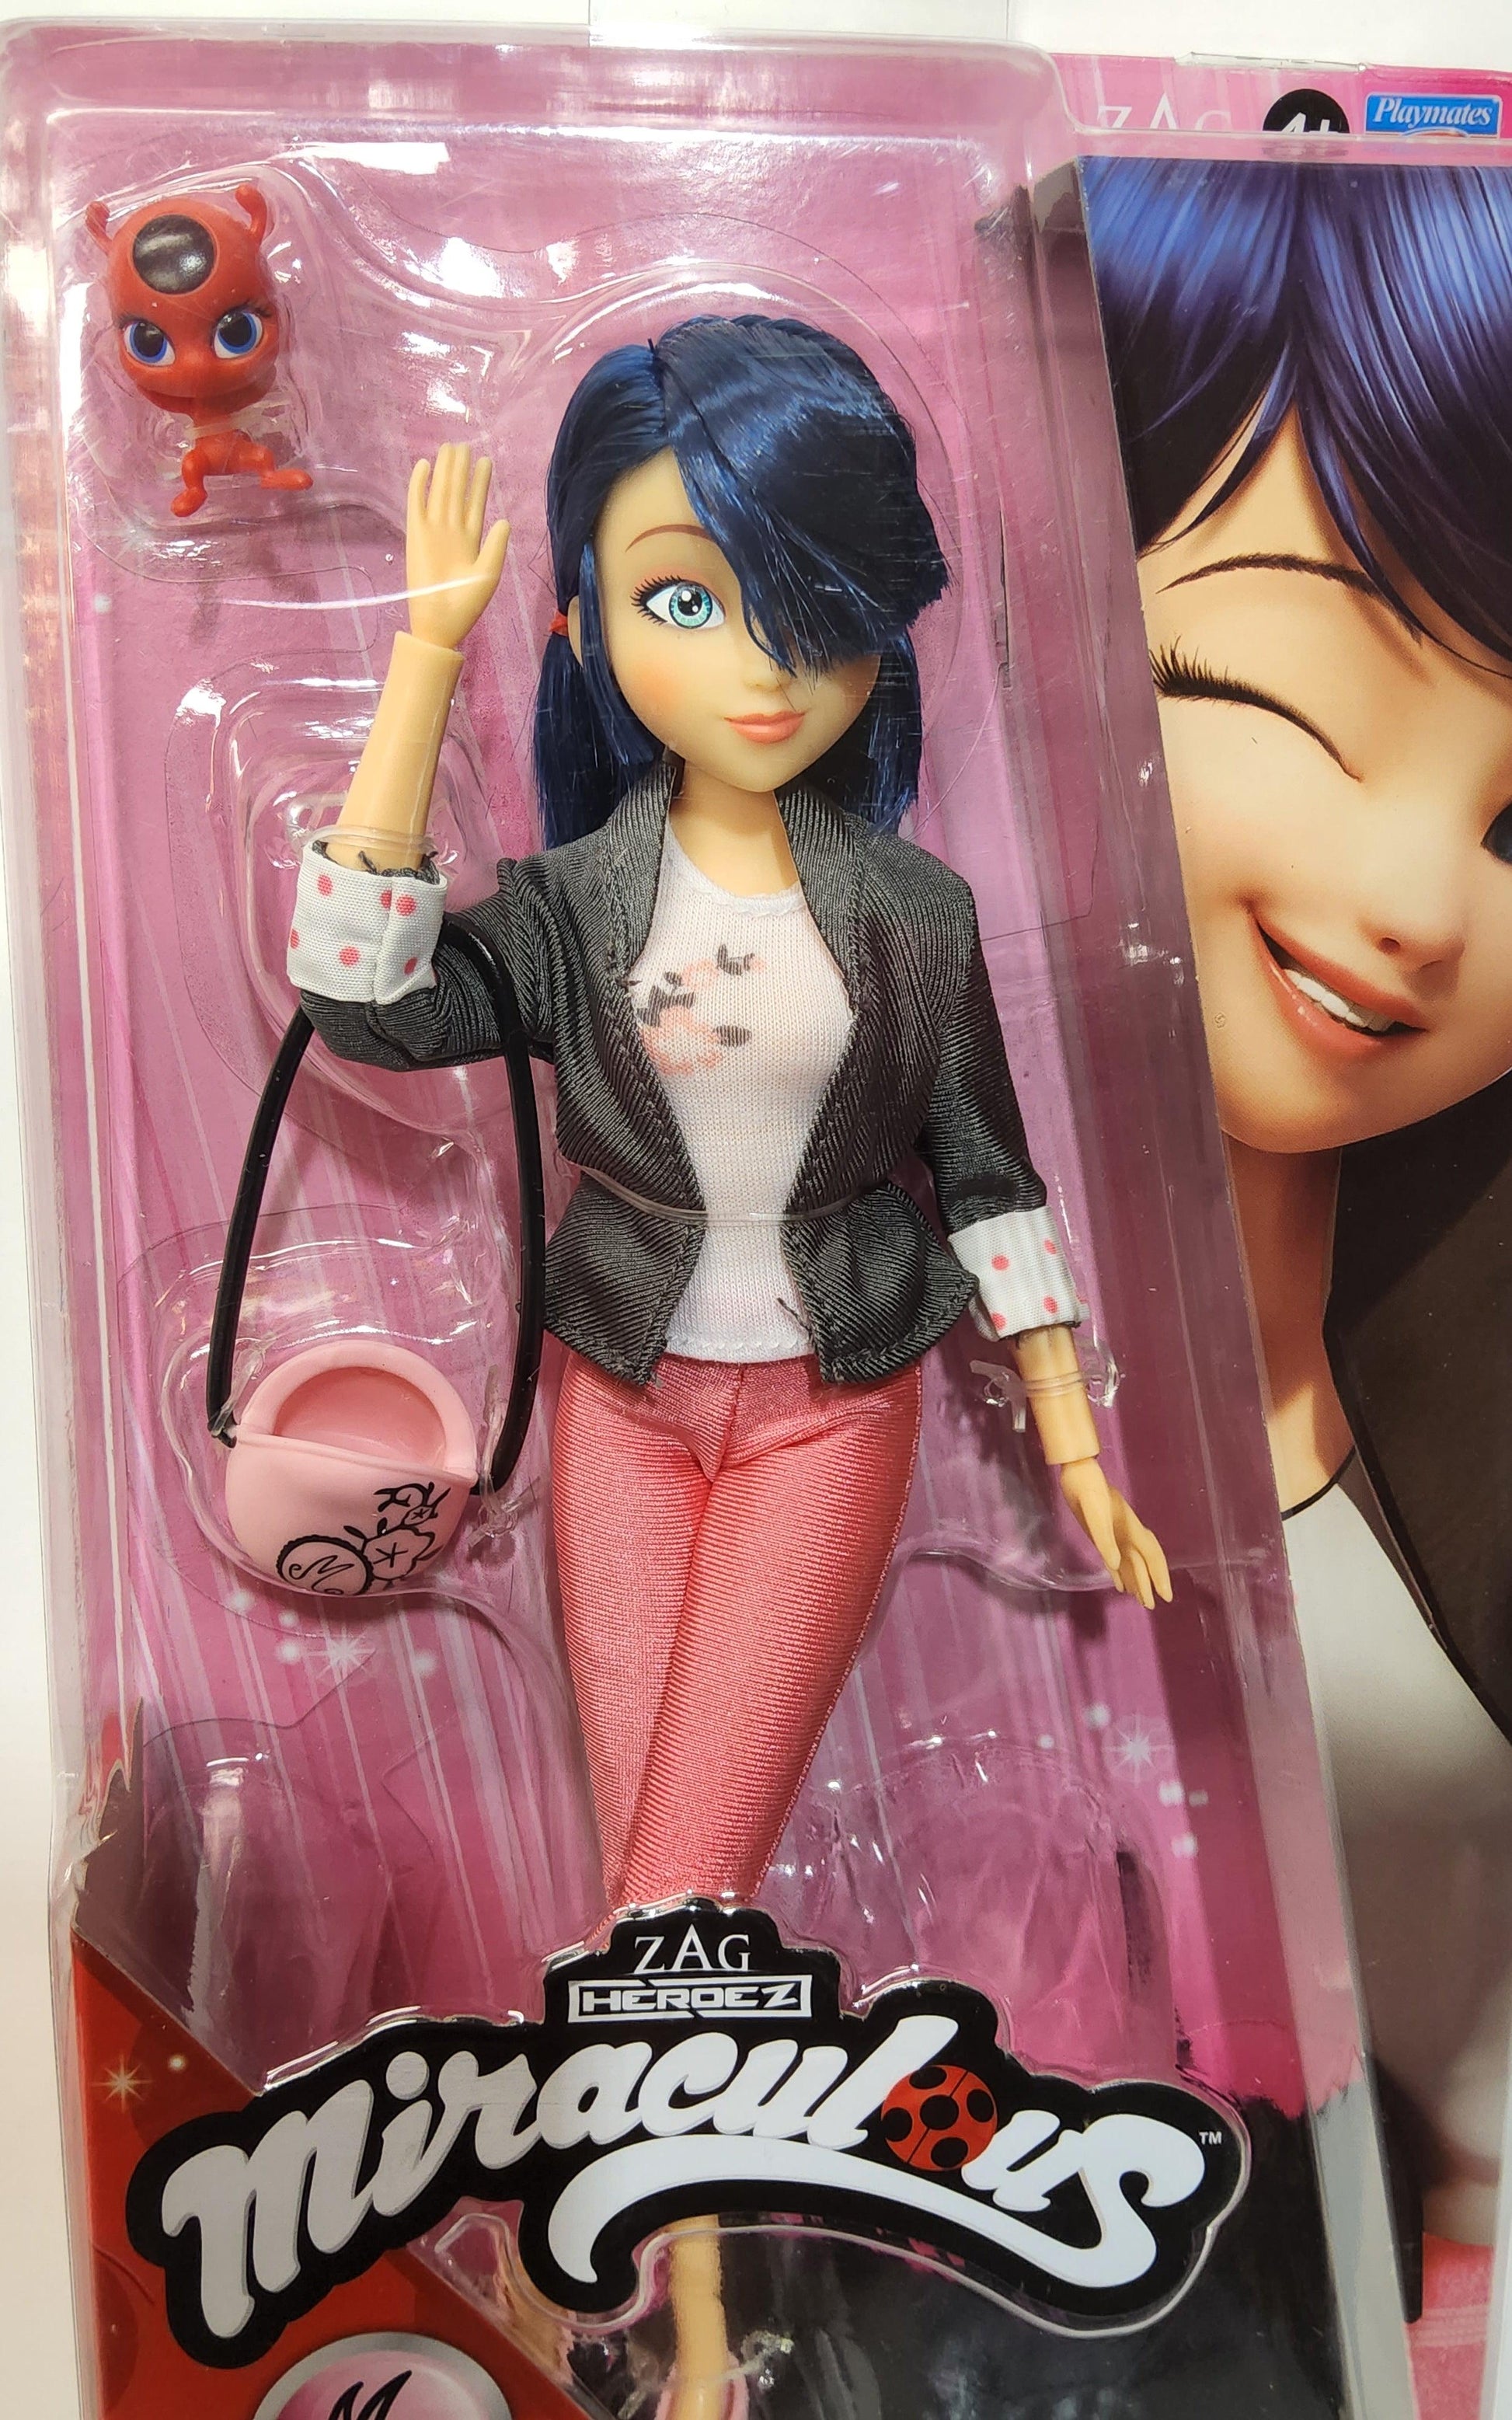 ZAG HEROEZ Miraculous MARINETTE Doll - 10.5" Playmates Toys 2020 Edition - Logan's Toy Chest